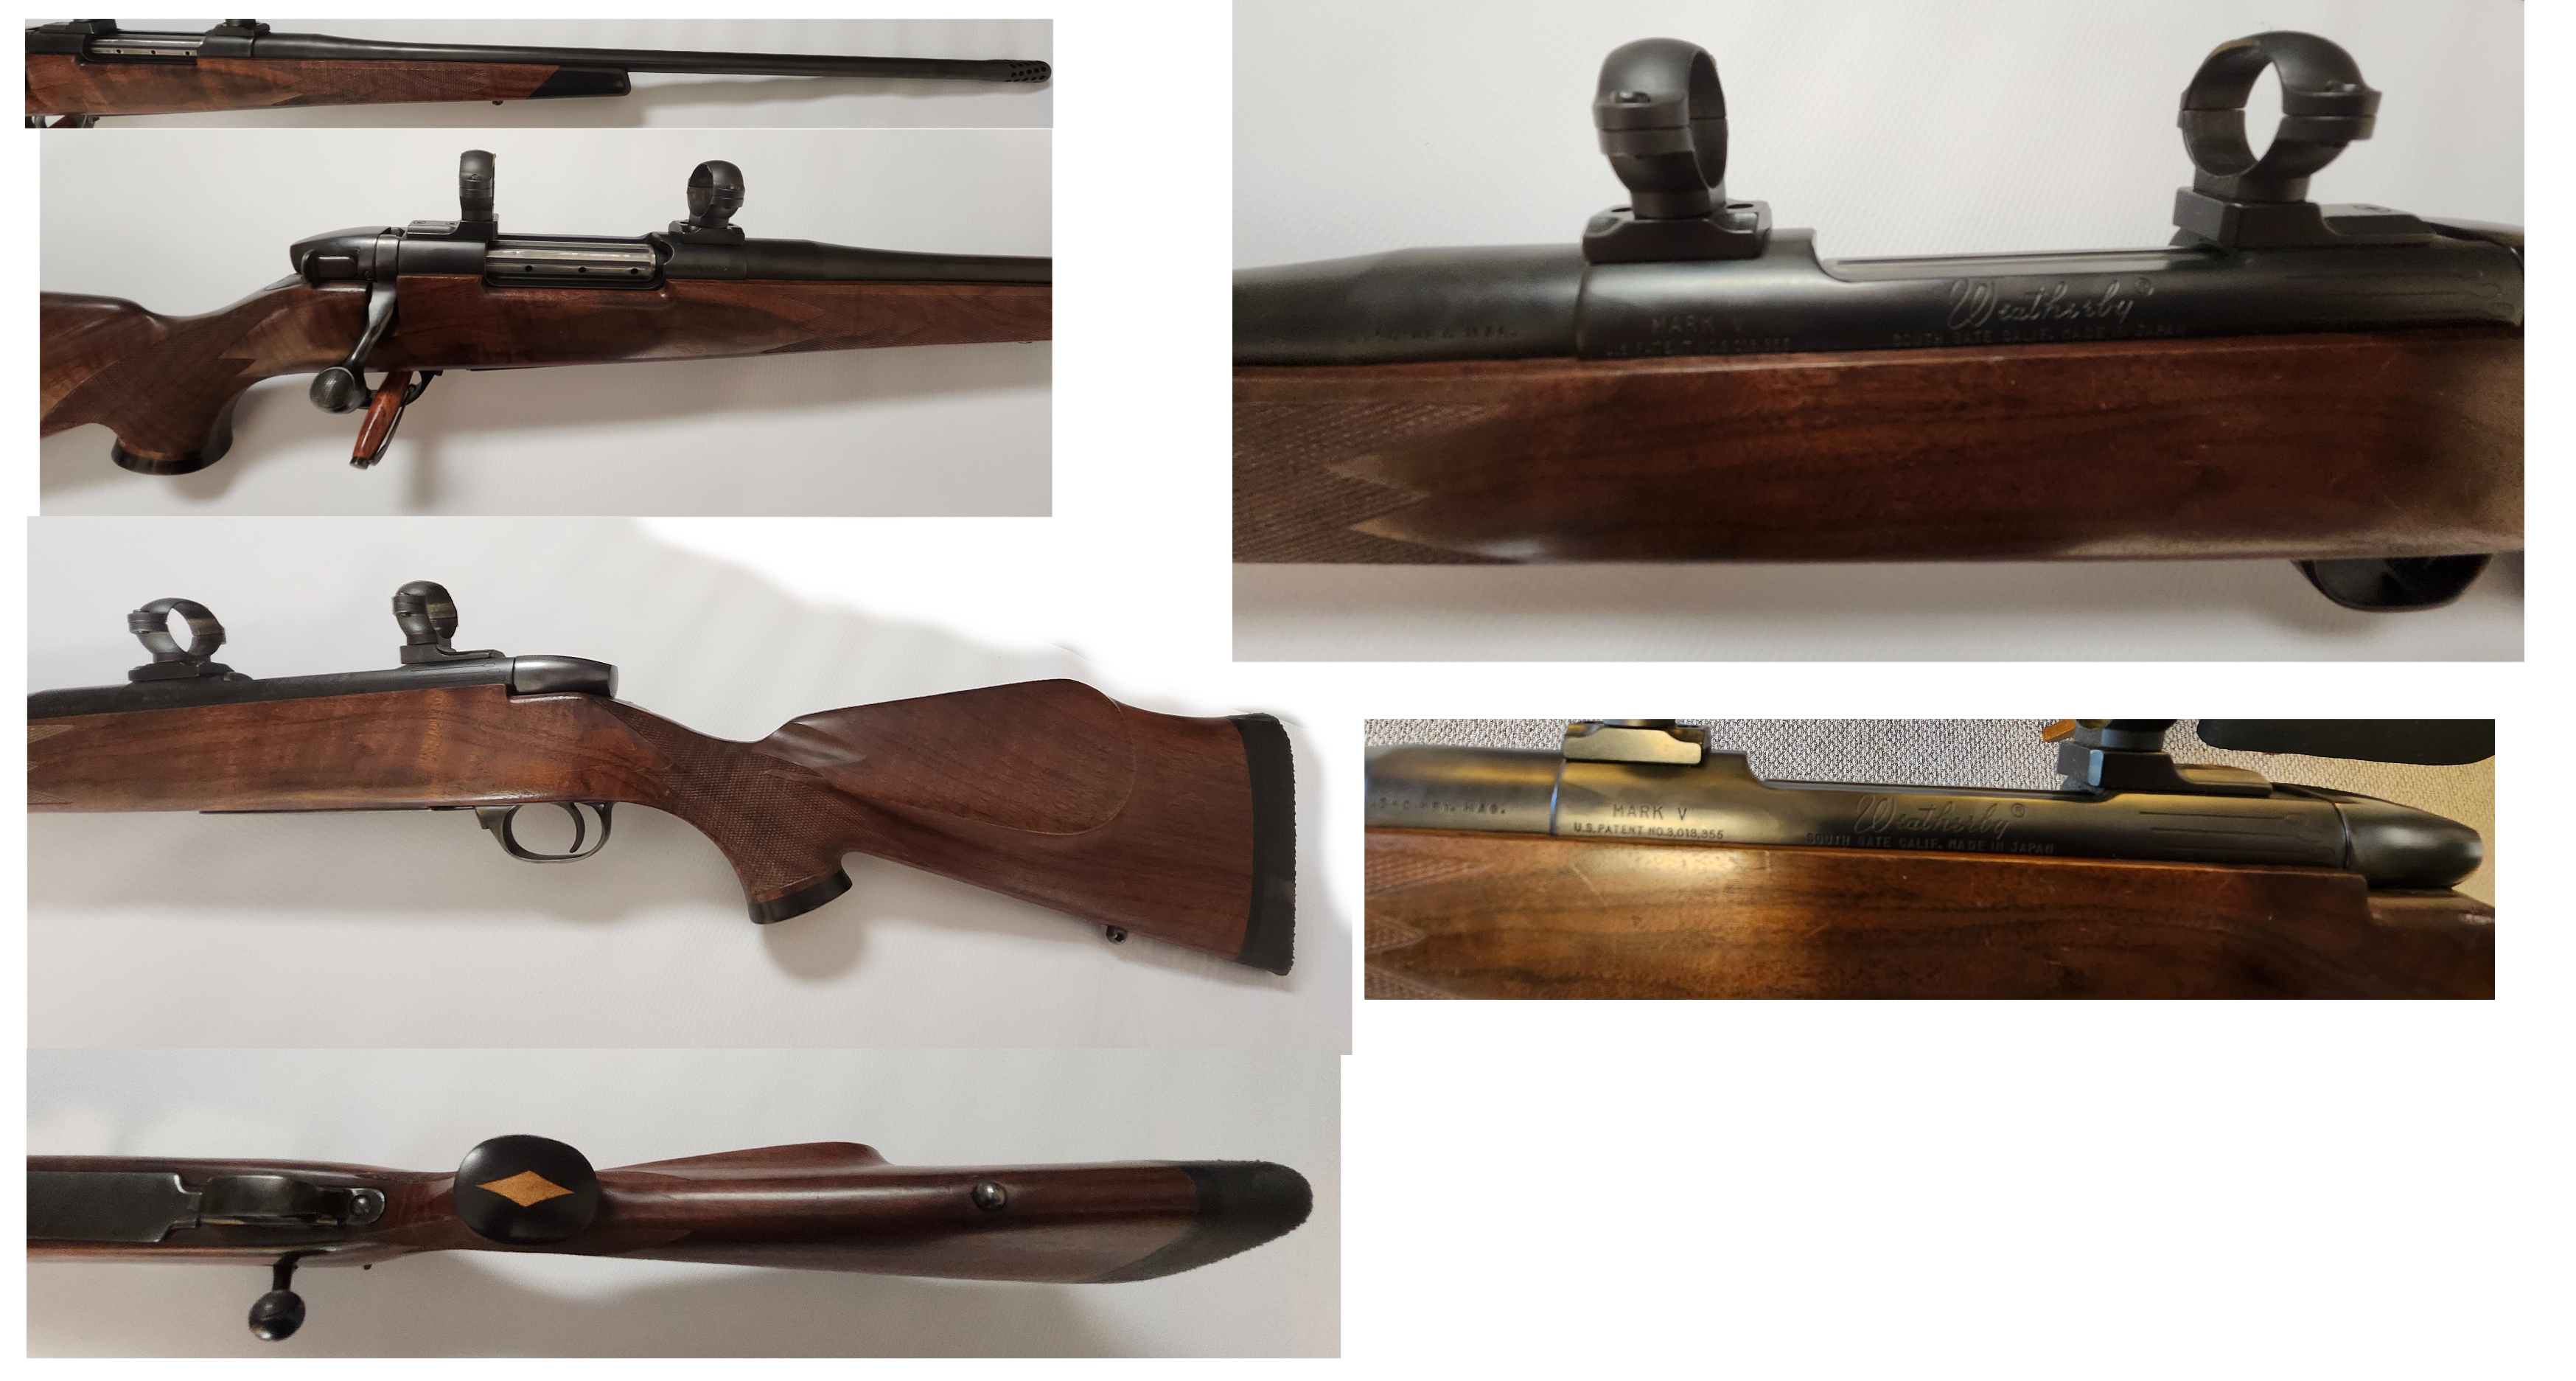 Weatherby Mark V Euromark Rifle 340 Weatherby Magnum 26" Barrel with Walnut Stock